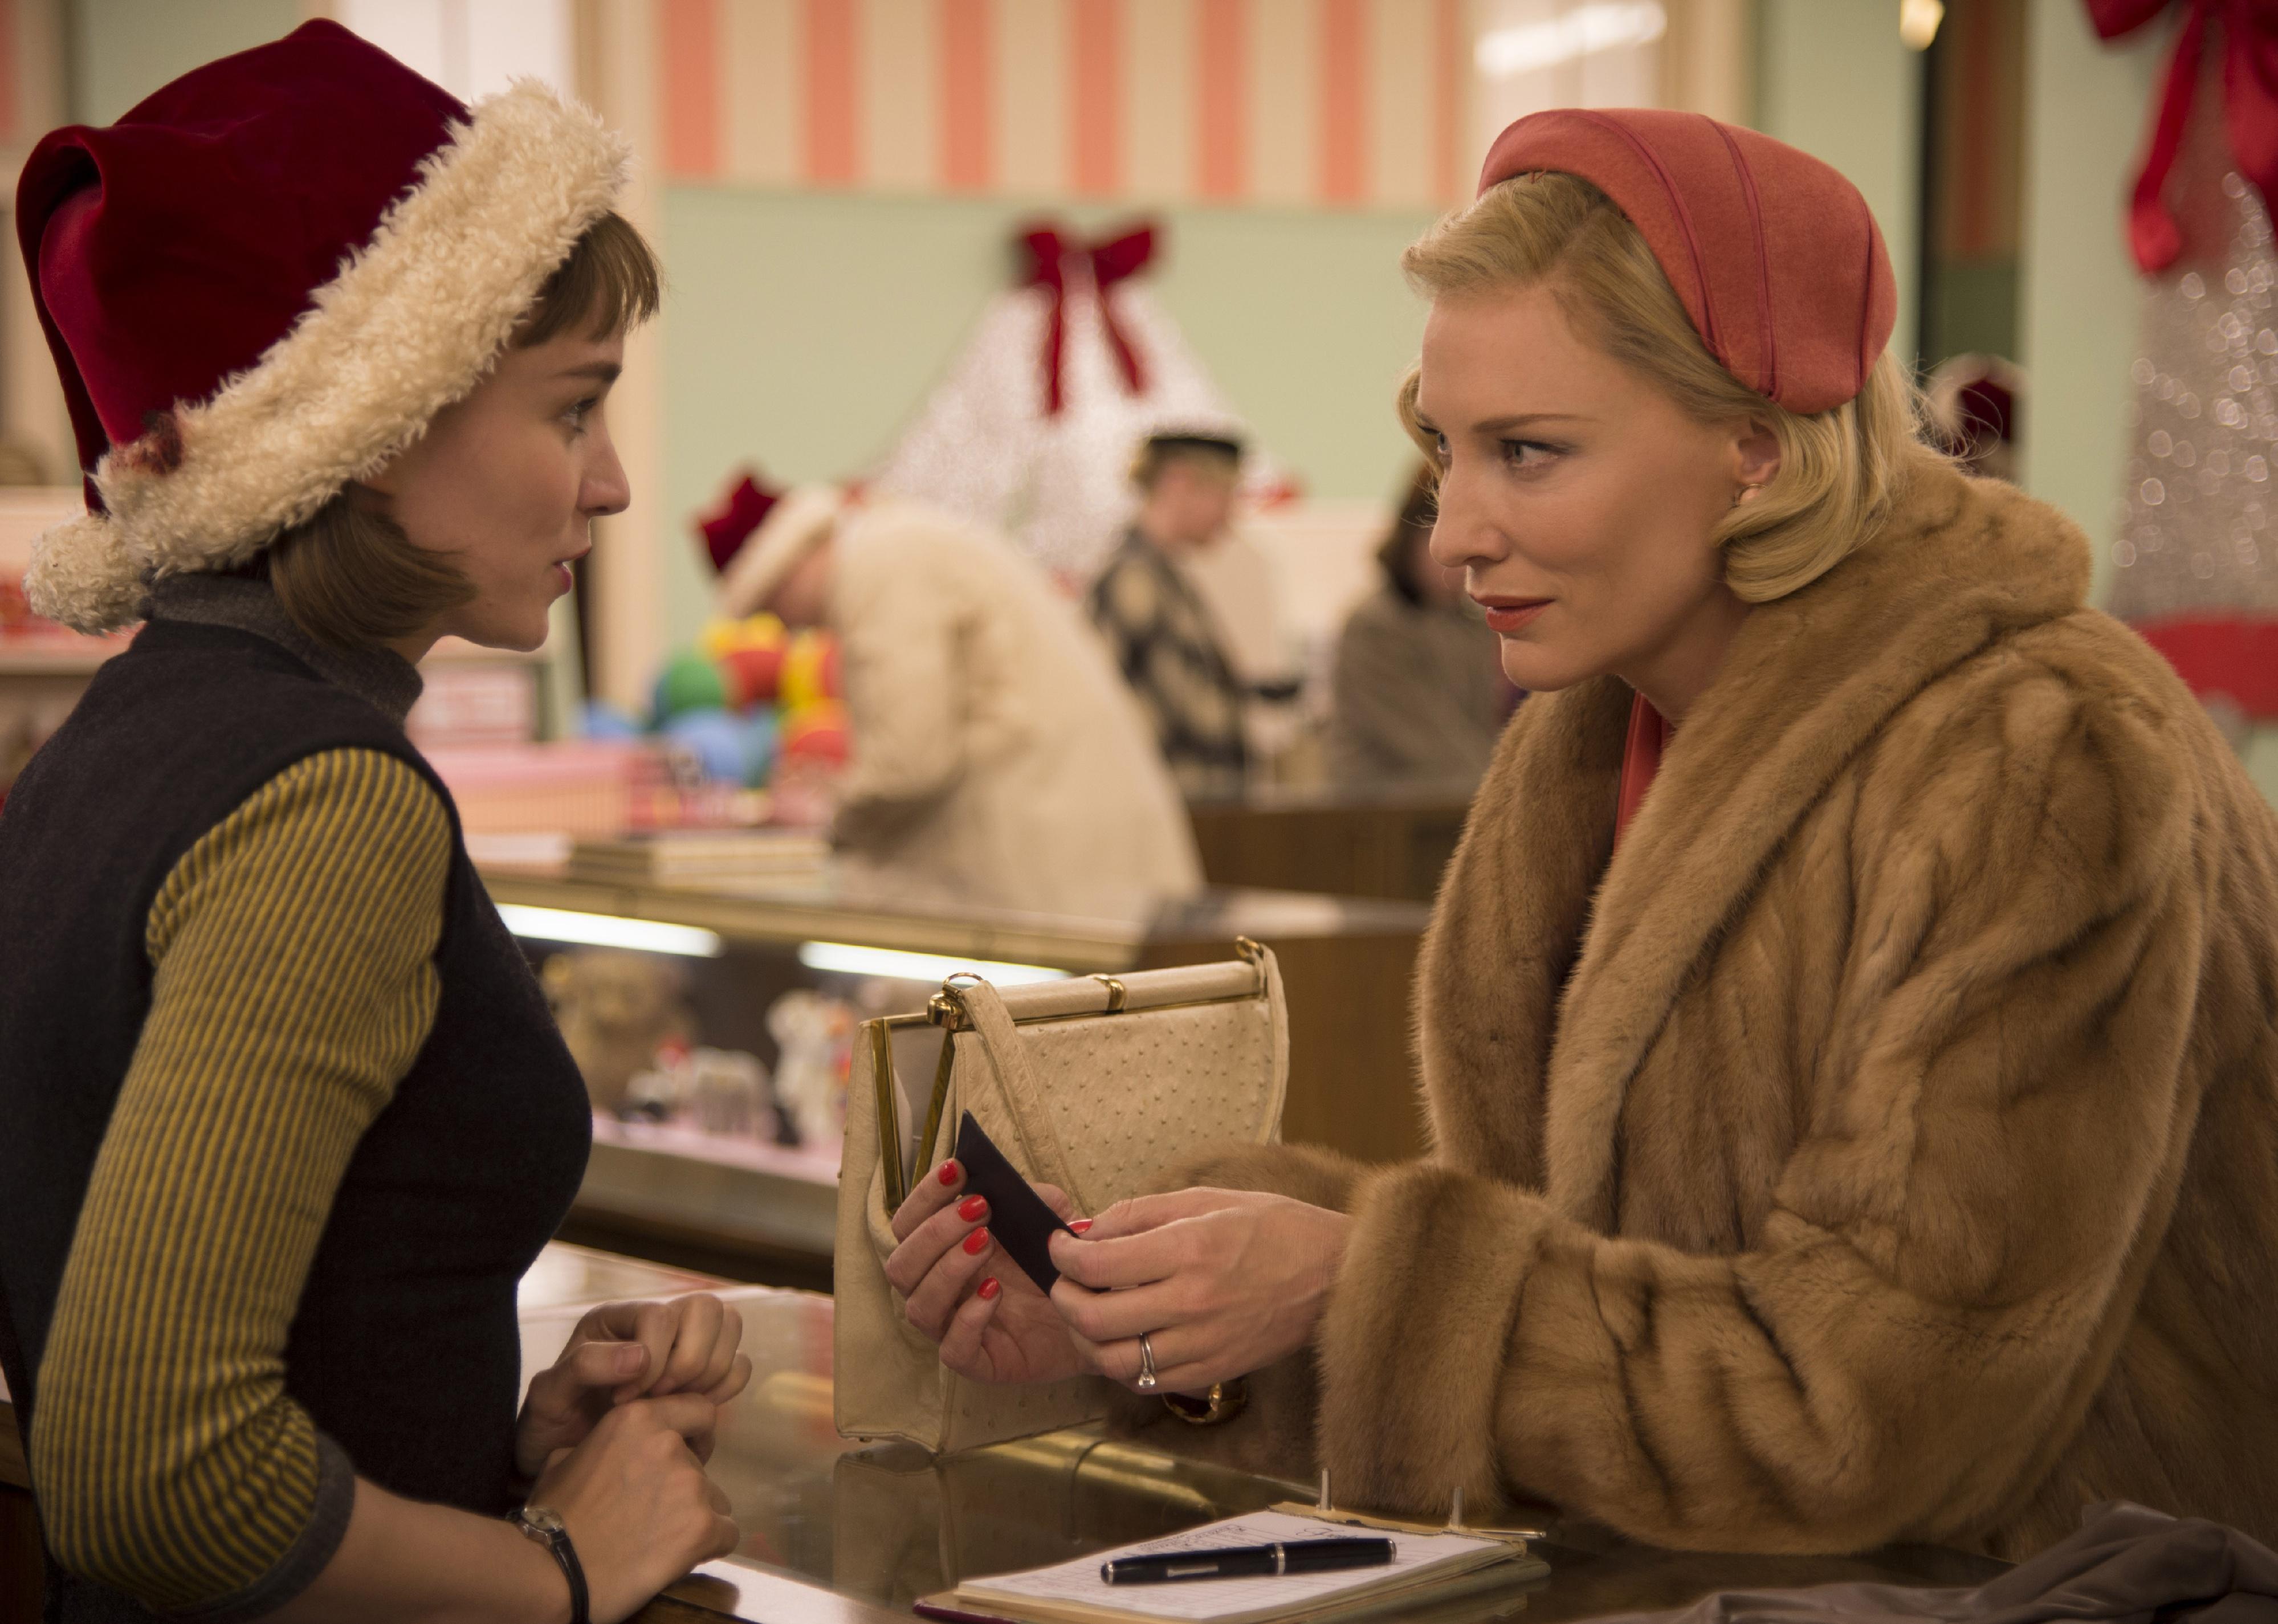 Cate Blanchett and Rooney Mara talking over a department store counter at Christmas.